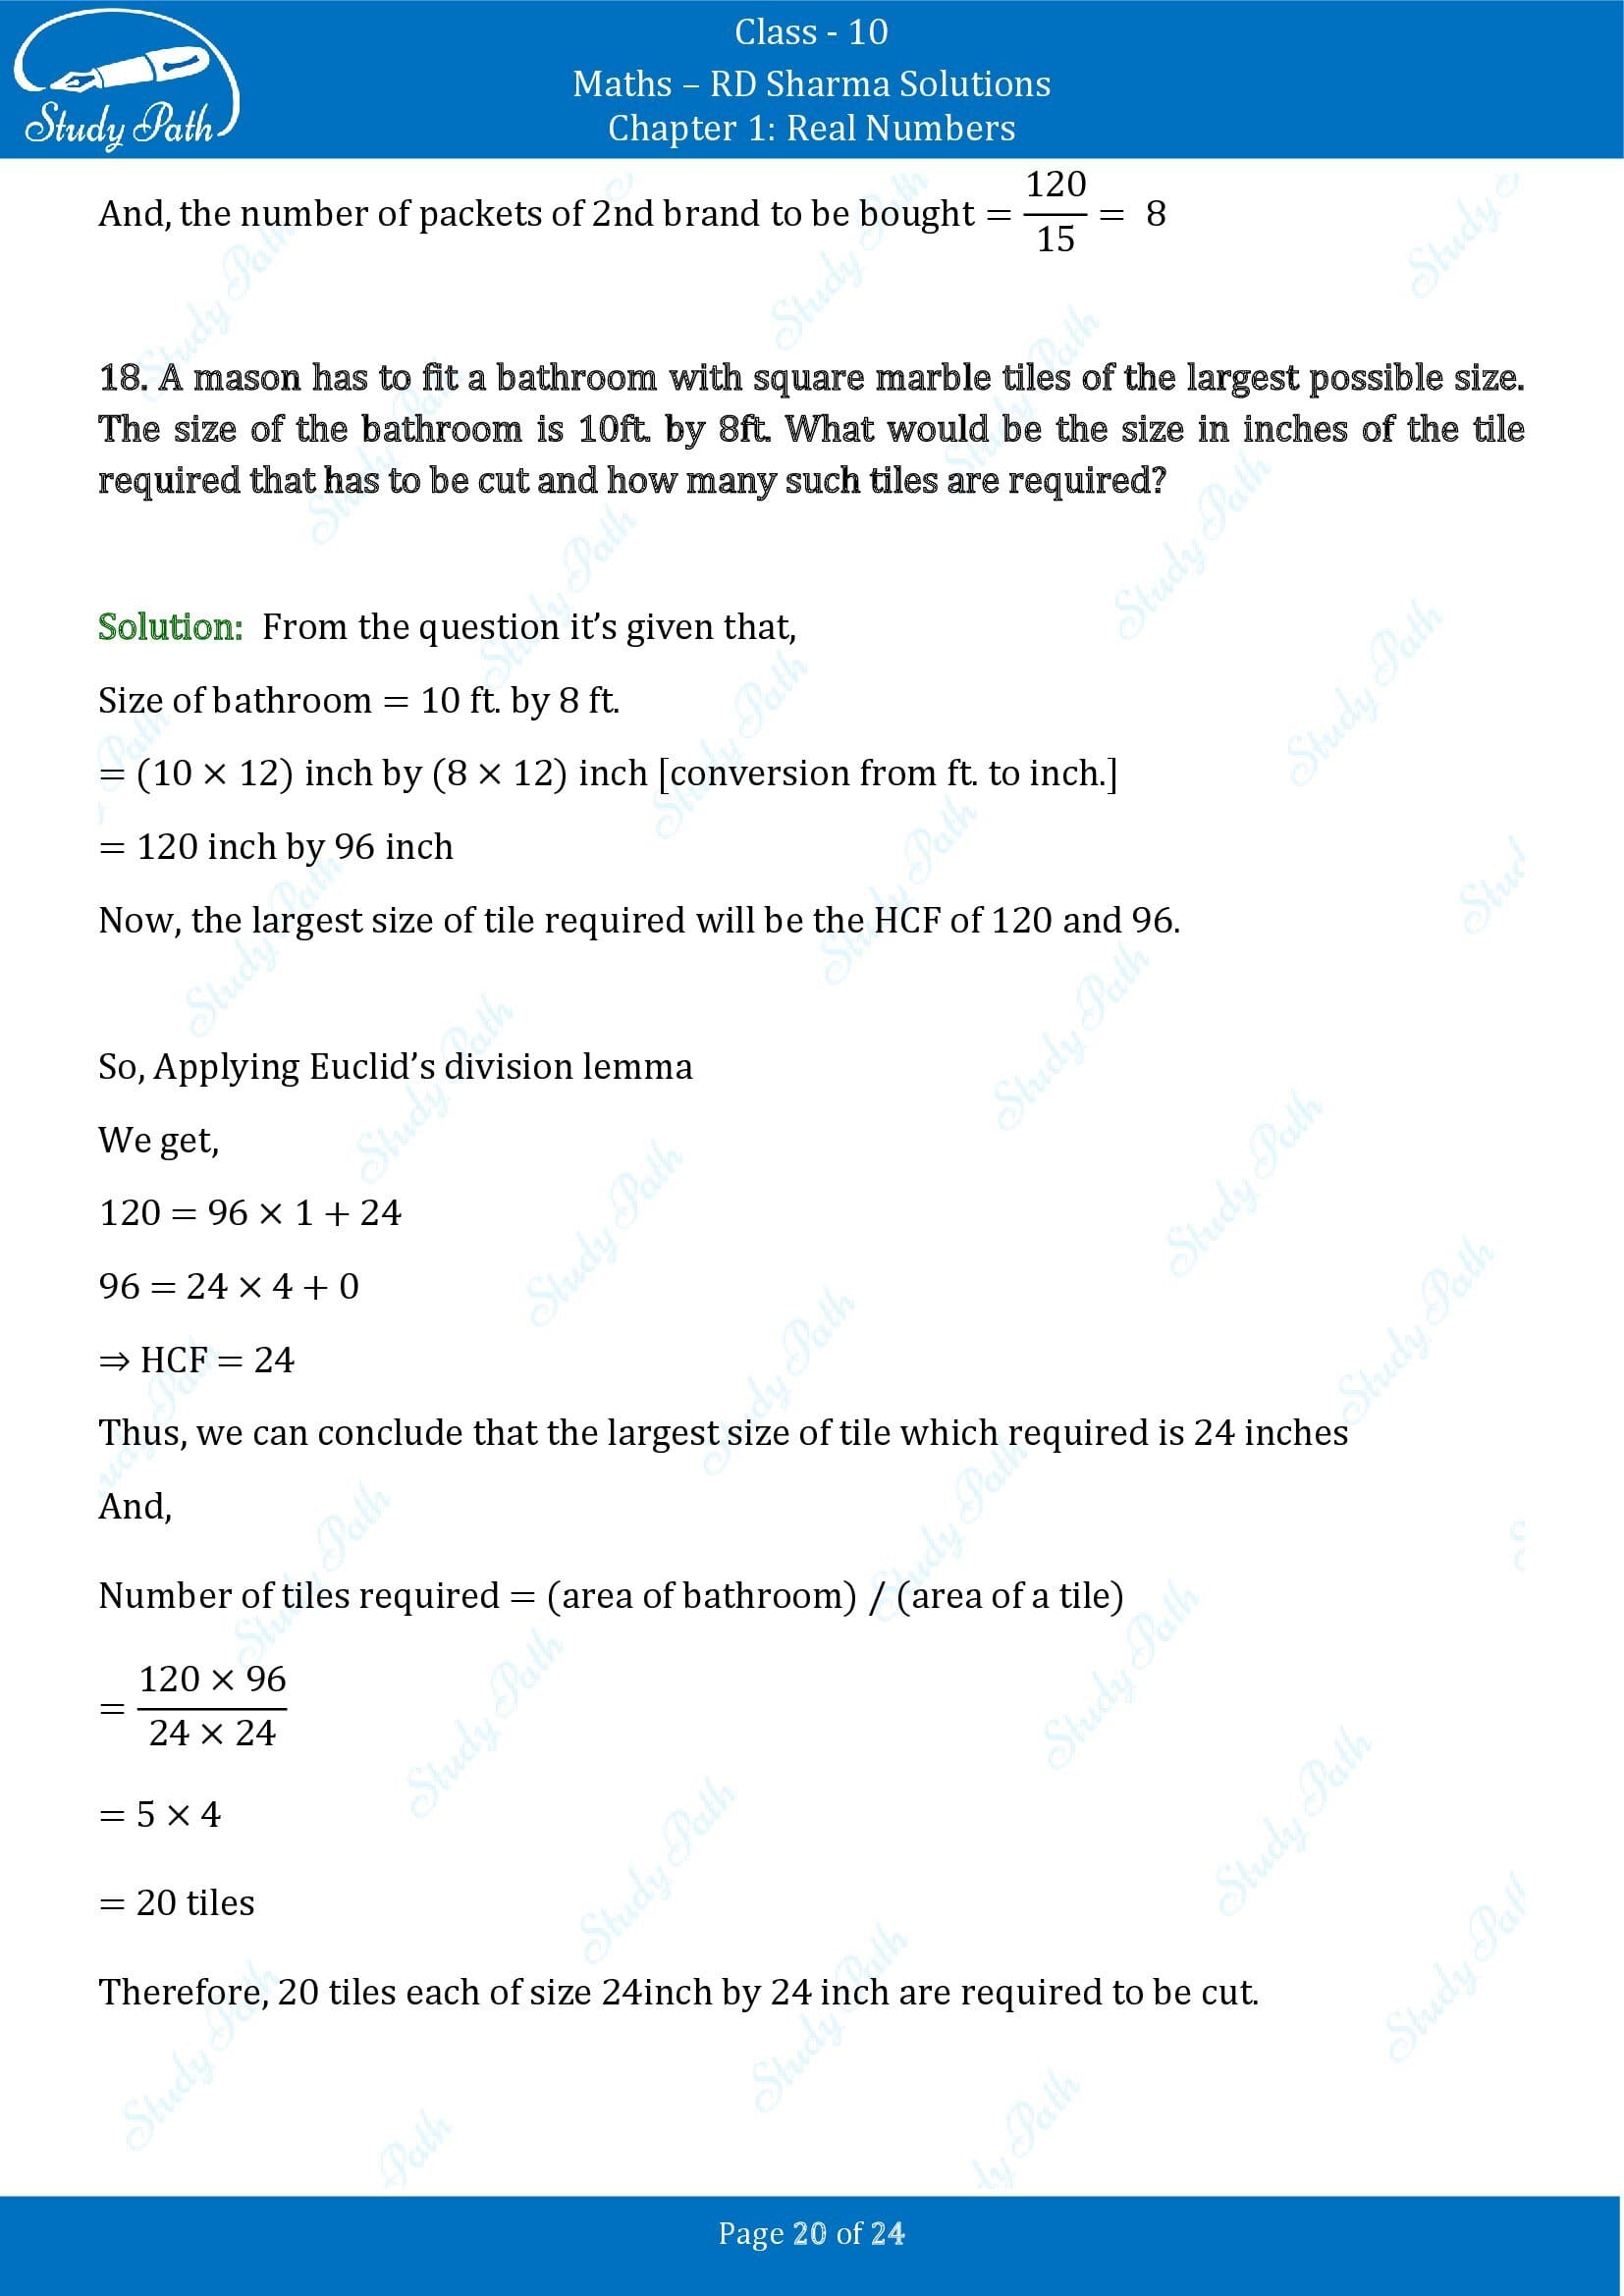 RD Sharma Solutions Class 10 Chapter 1 Real Numbers Exercise 1.2 00020